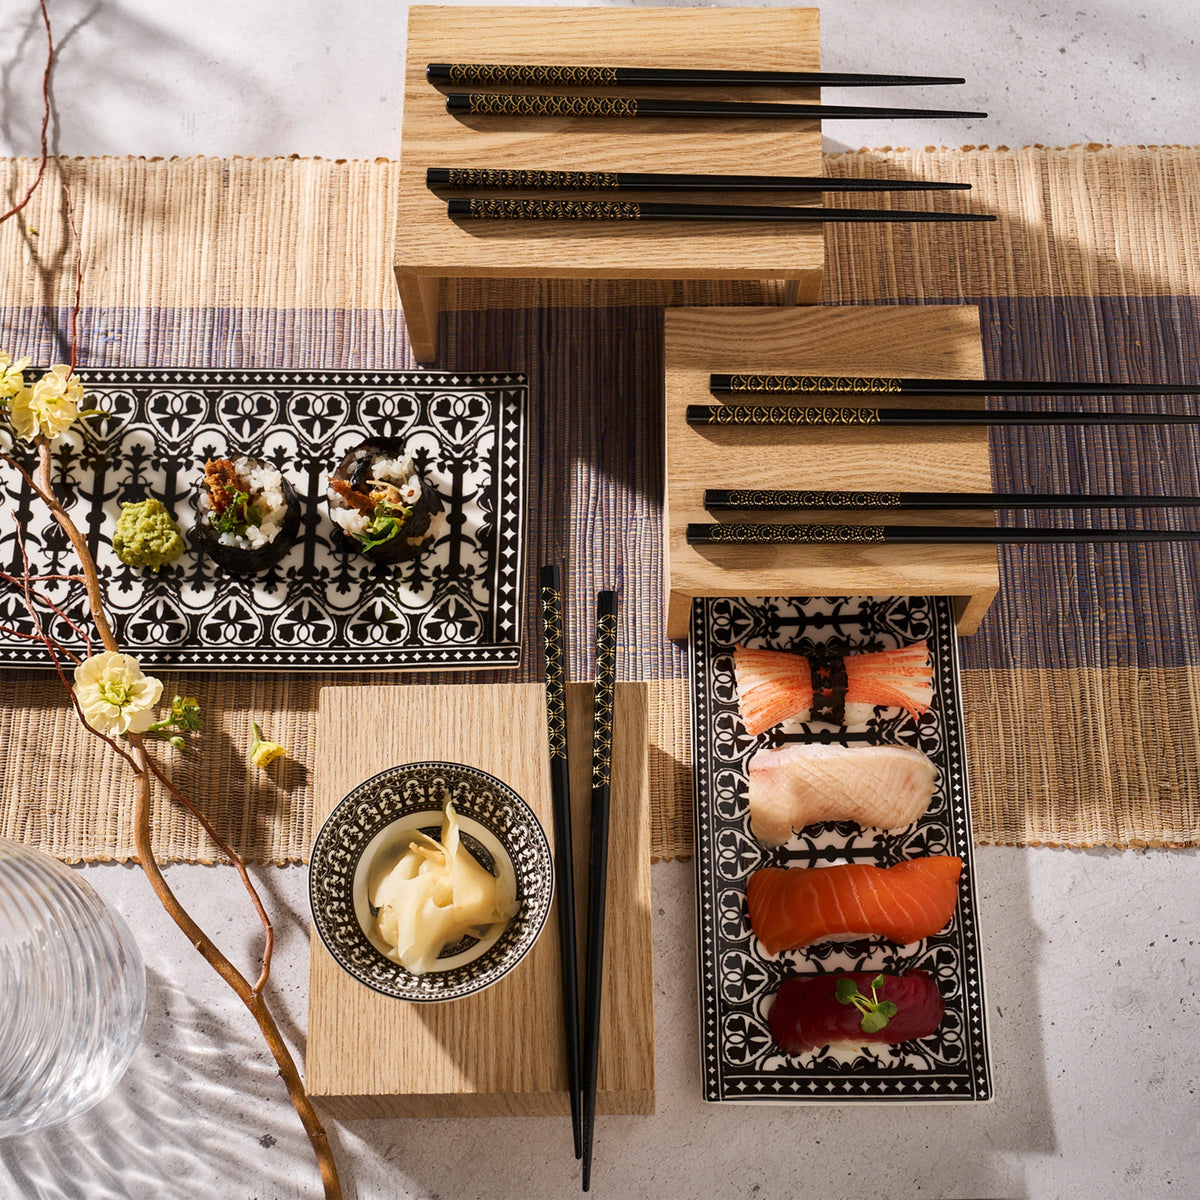 An overhead view of a dining setup featuring sushi and sides on patterned plates and wooden stands, accompanied by black chopsticks. The table, accented with Casablanca-inspired touches, has a woven placemat. Flowers, a glass of water, and Caskata&#39;s Casablanca Dipping Dishes, Set of 4 bone china bowls complete the elegant scene.